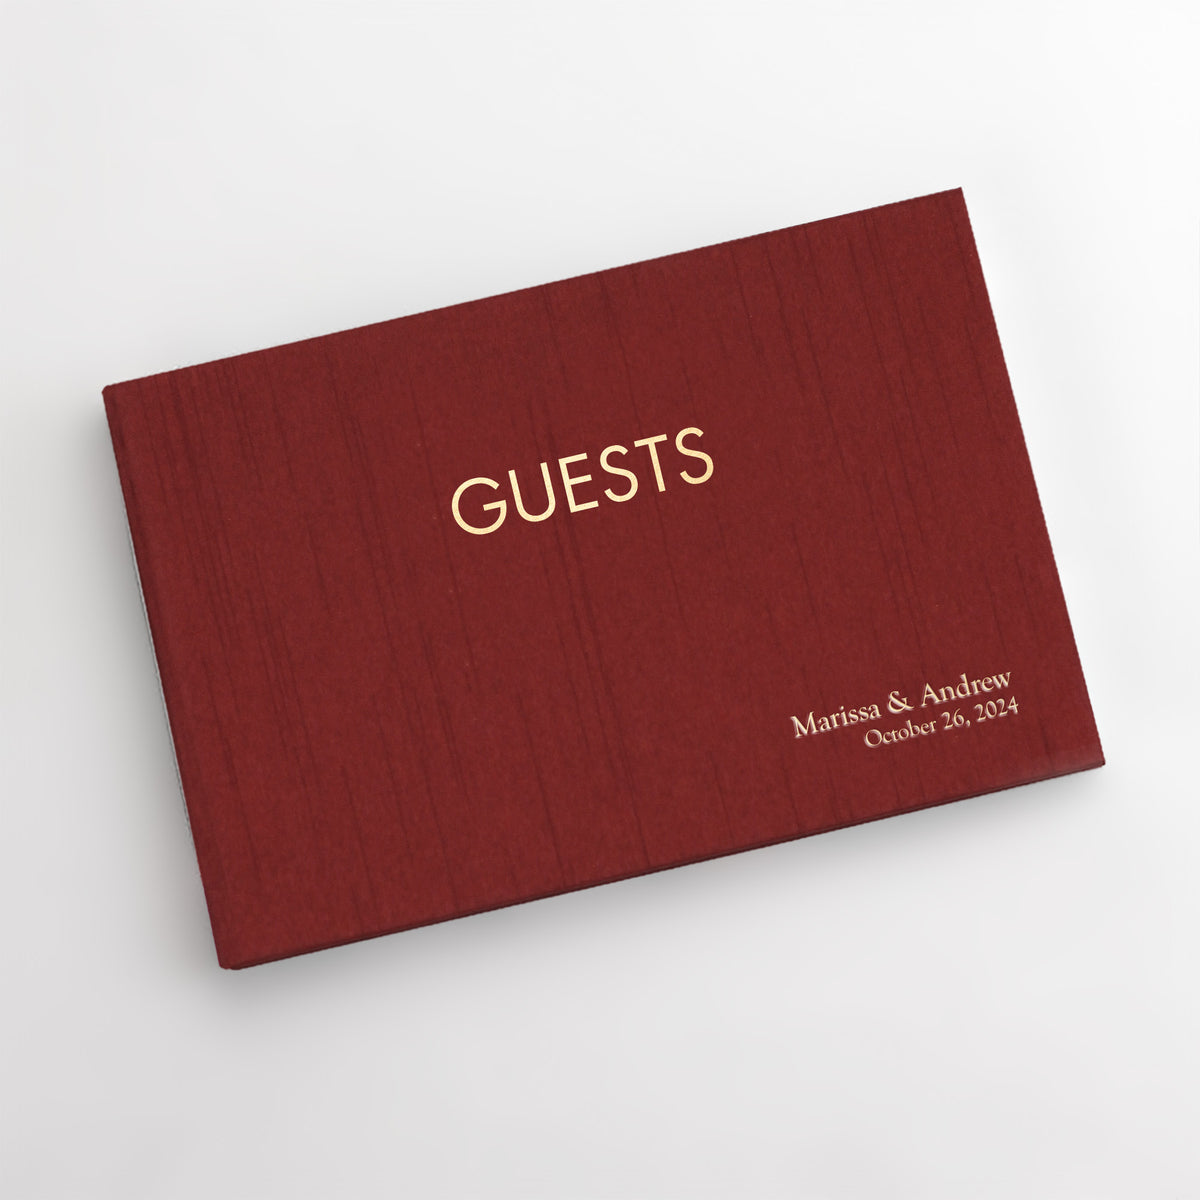 Guestbook Embossed with “Guests” with Garnet Silk Cover